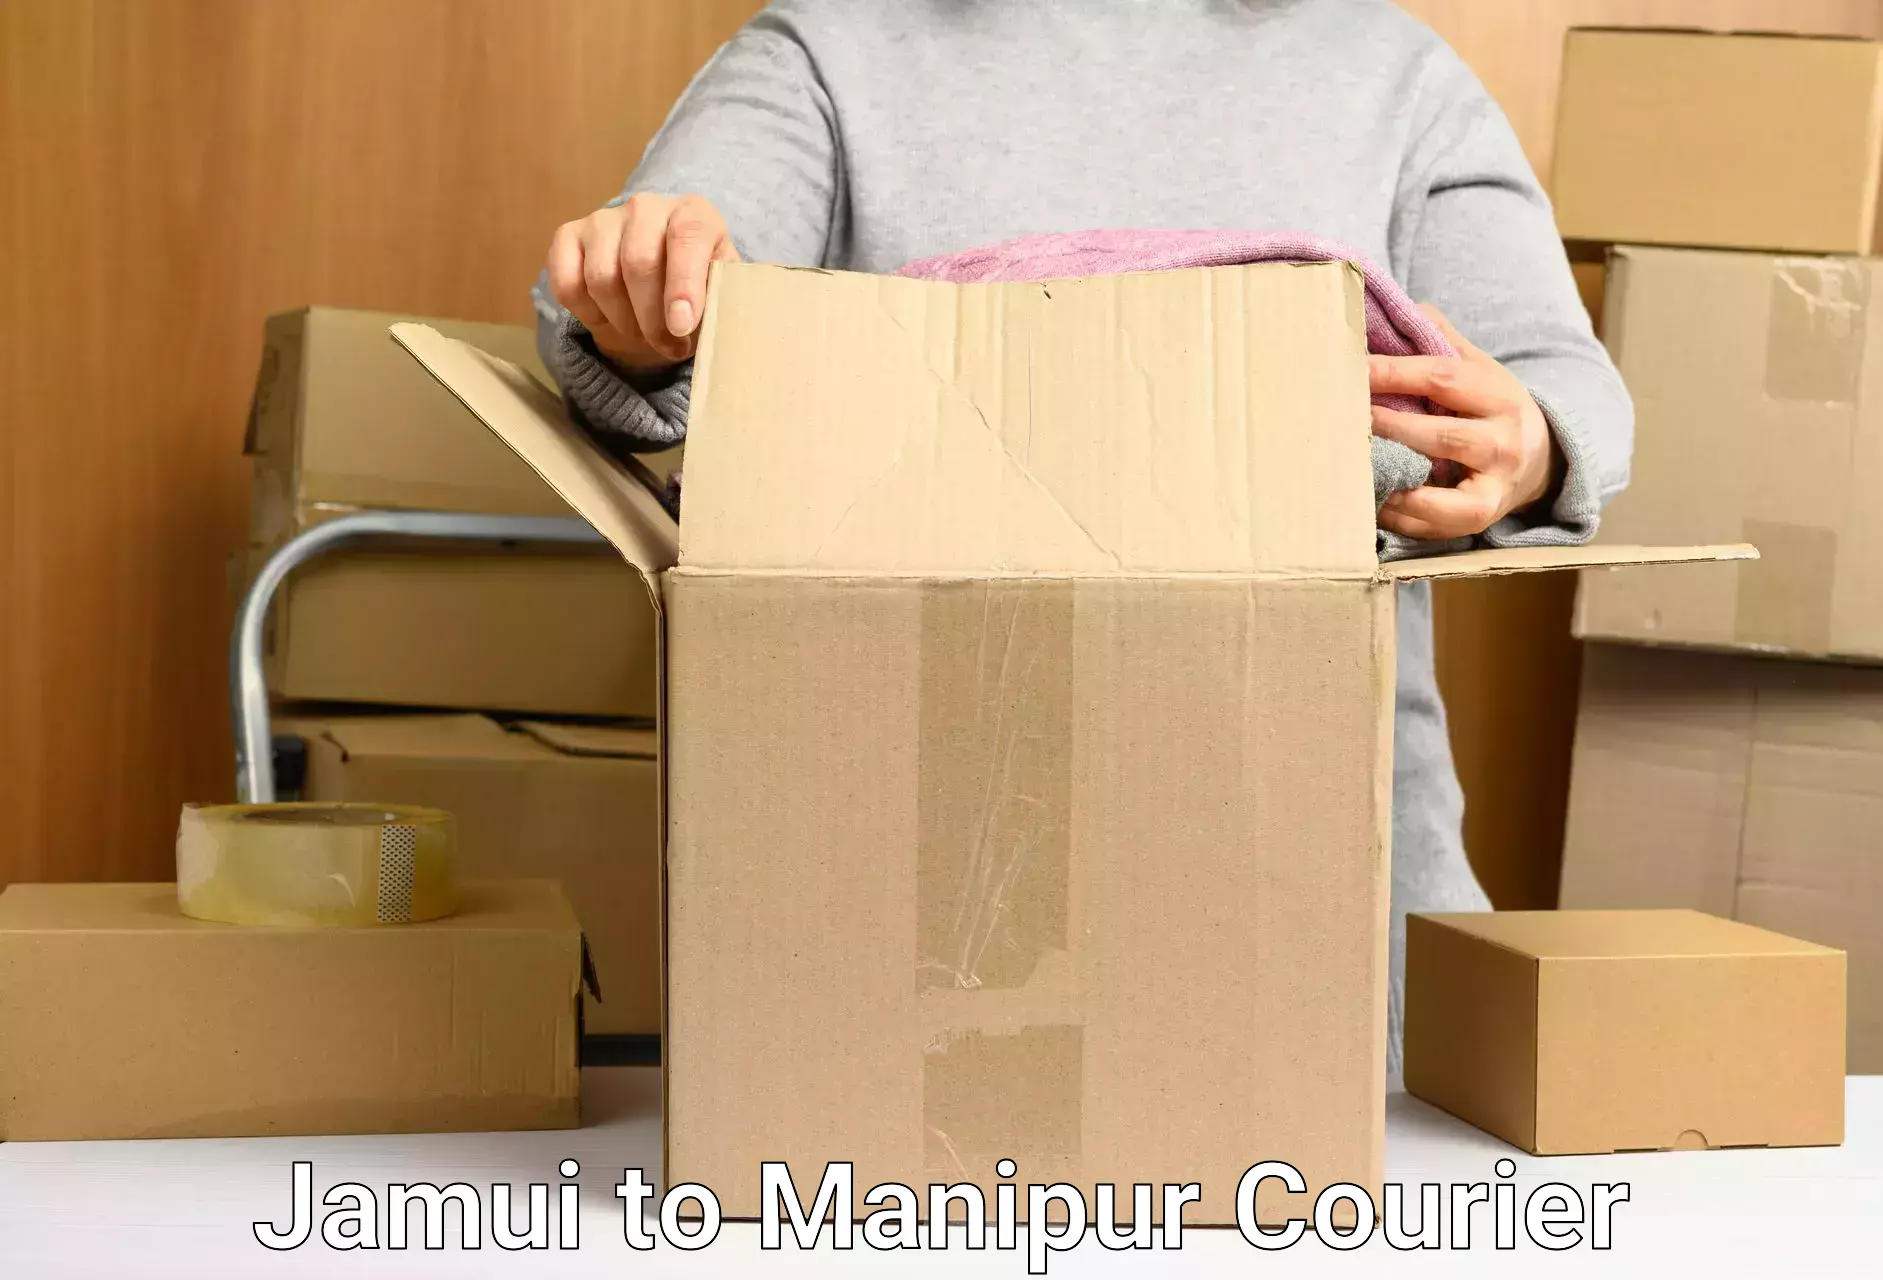 Doorstep delivery service Jamui to Moirang